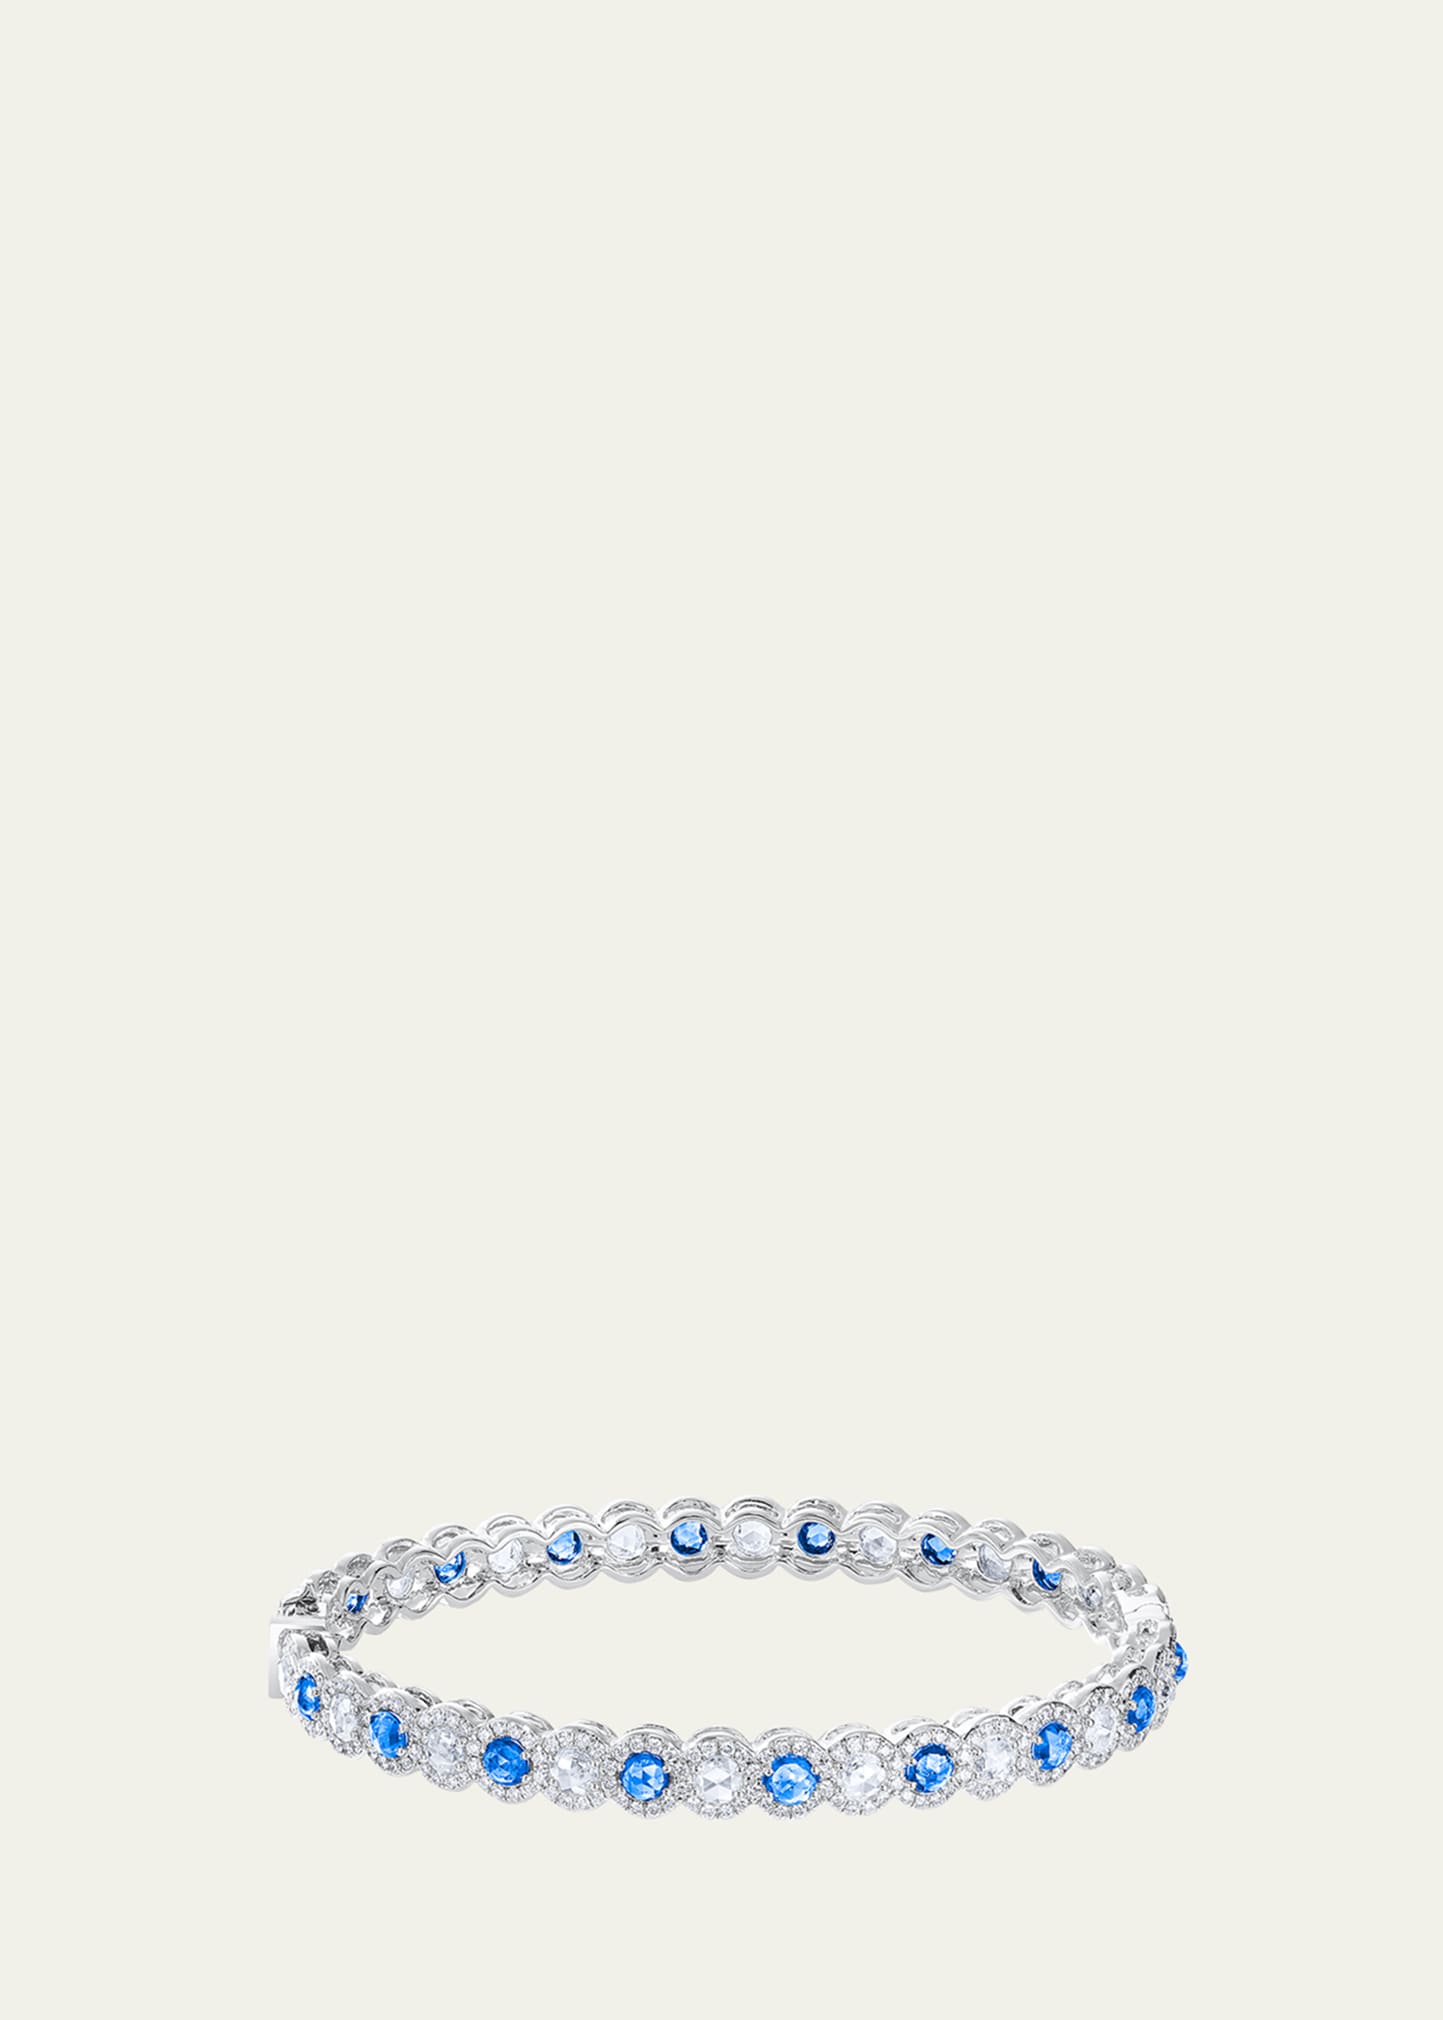 Shop 64 Facets 18k White Gold Oval Hinged Bracelet With Diamonds And Blue Sapphires